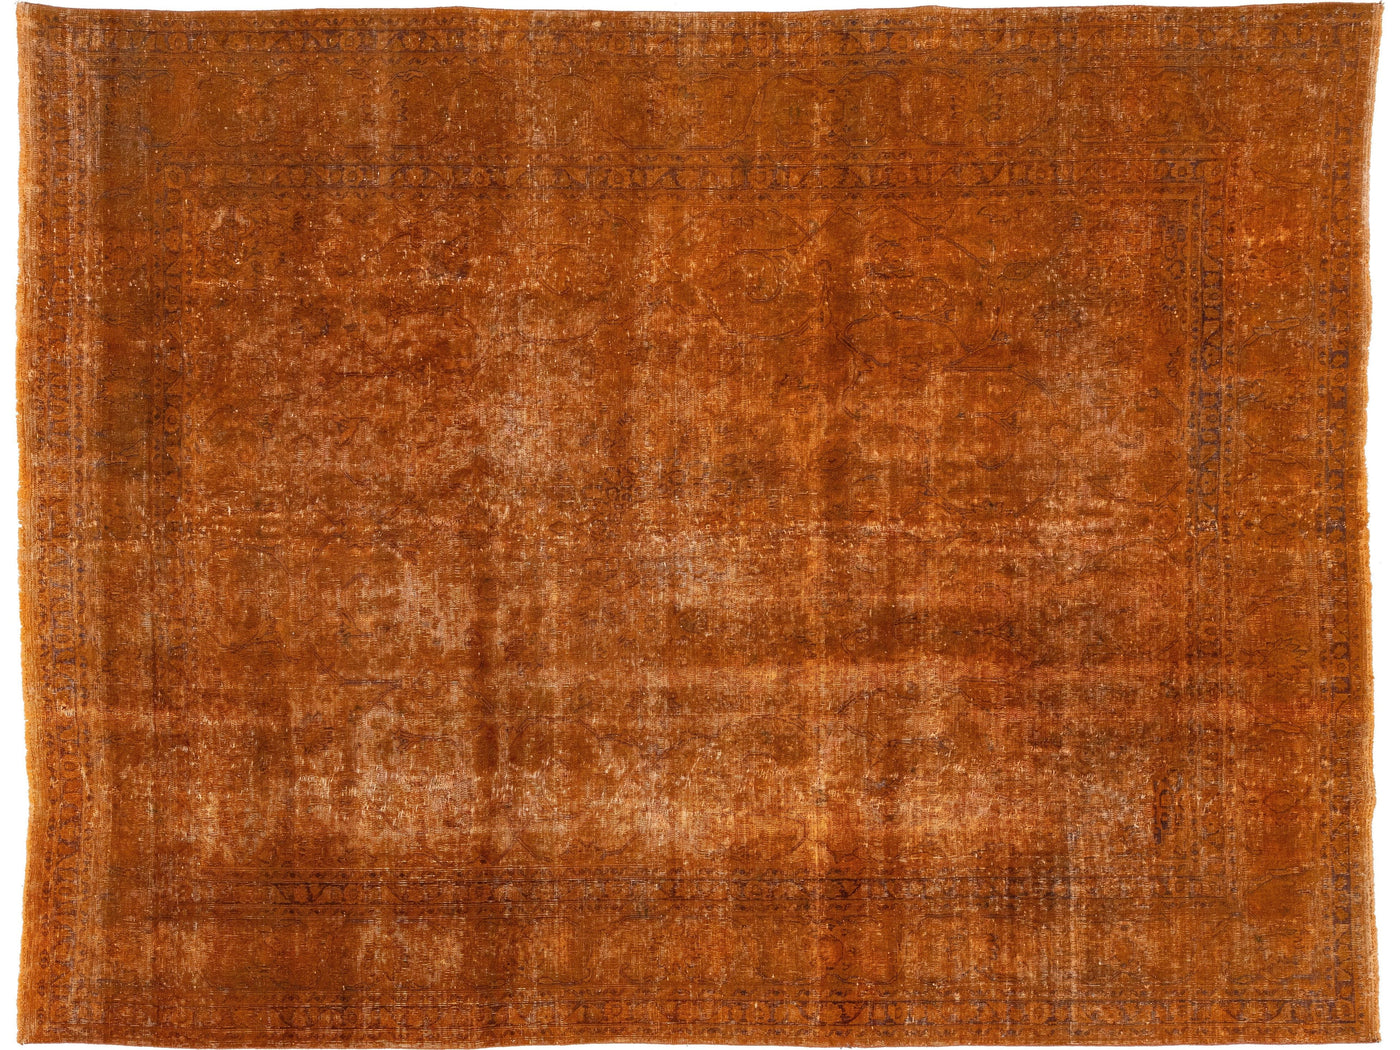 Antique Overdyed Wool Rug 10 x 12